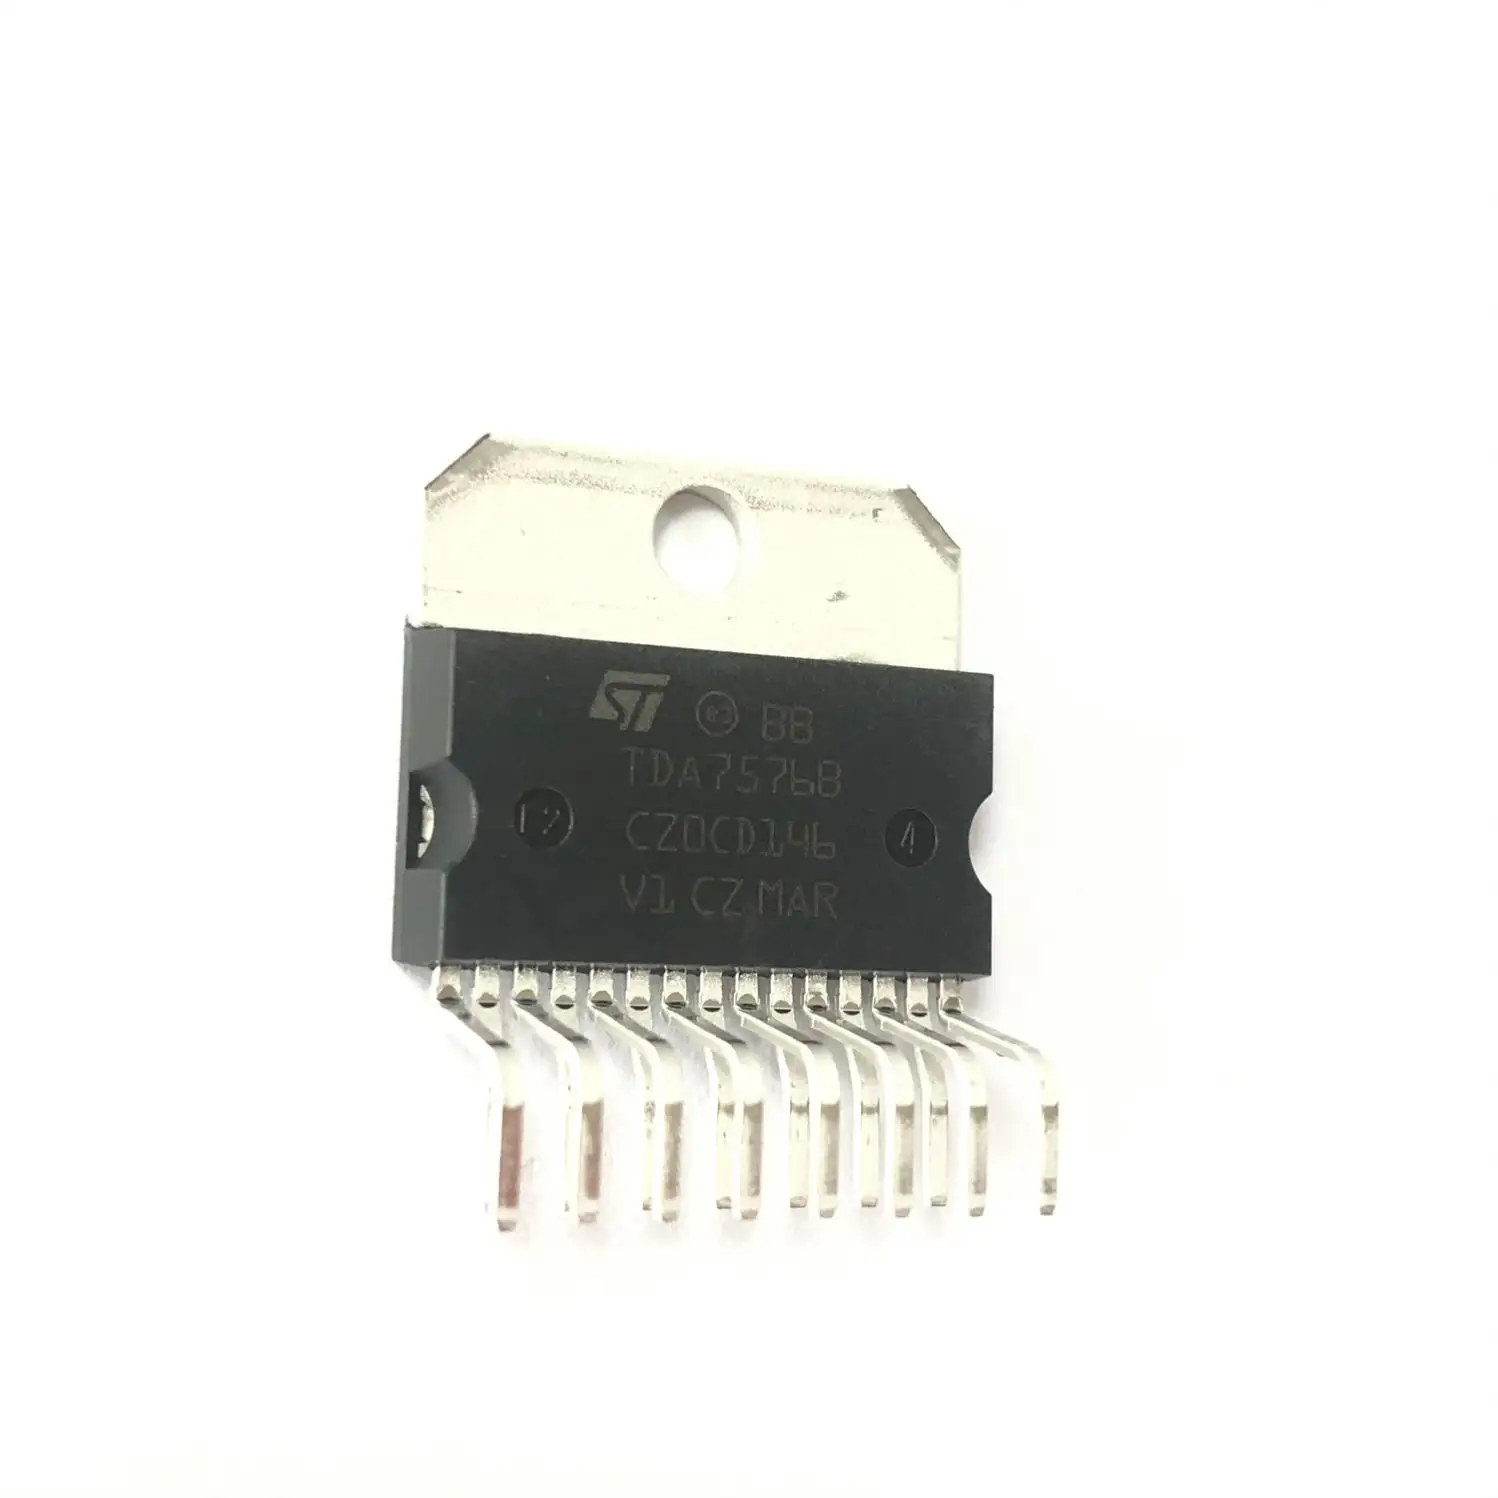 ZIP-15 audio amplifier original IC chip electronic component BOM with single direct insertion TDA7576B